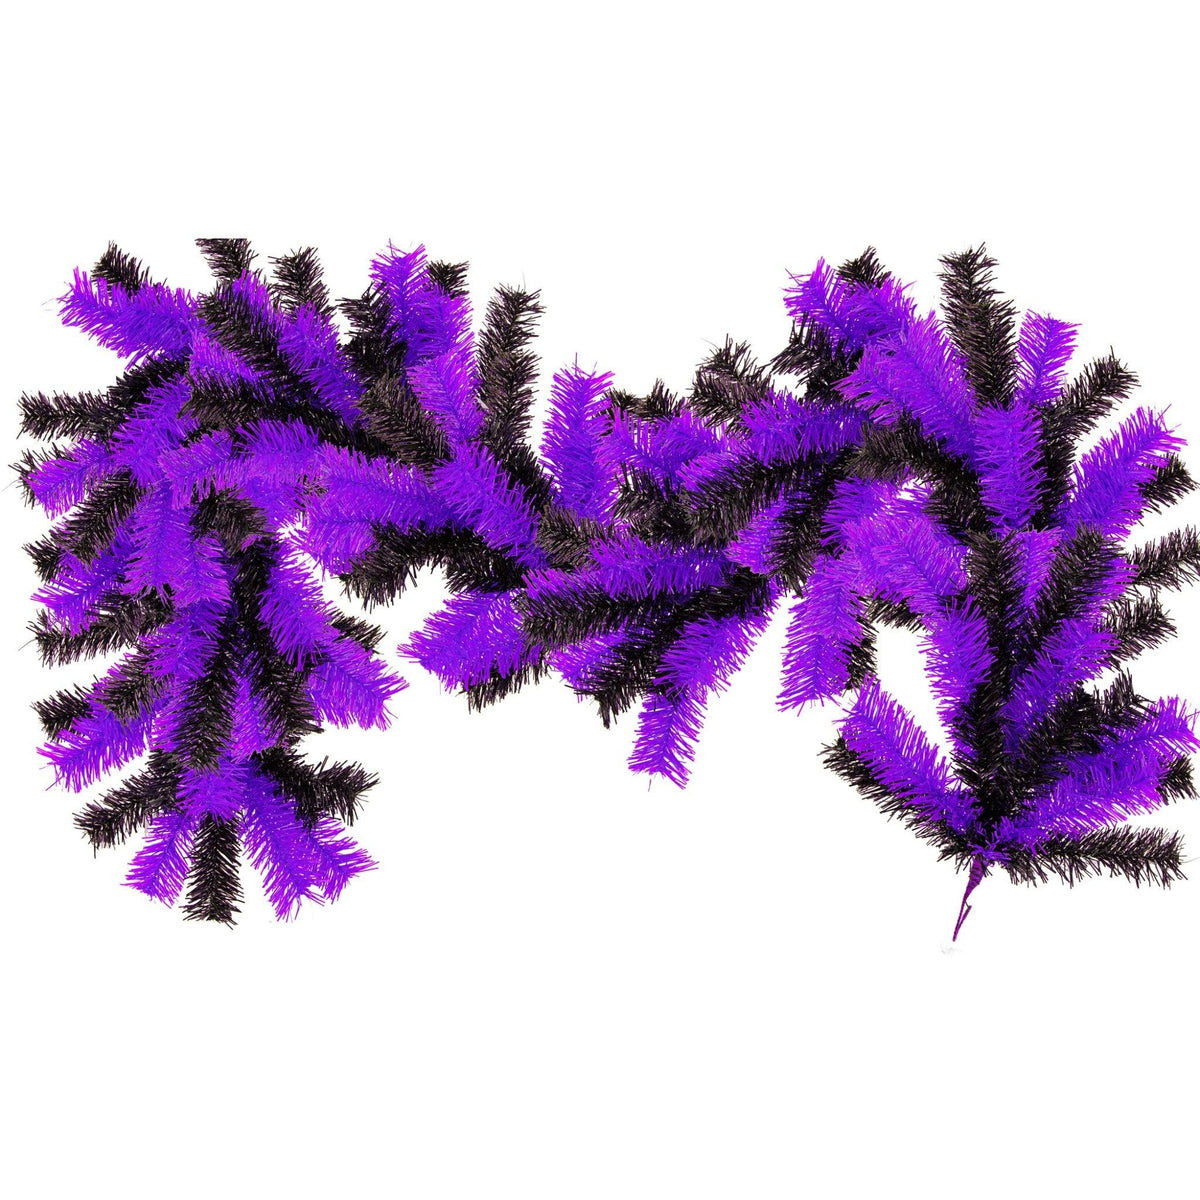 Shop for Lee Display's brand new 6FT Shiny Metallic Purple and Black Tinsel Brush Garlands on sale now at leedisplay.com.  